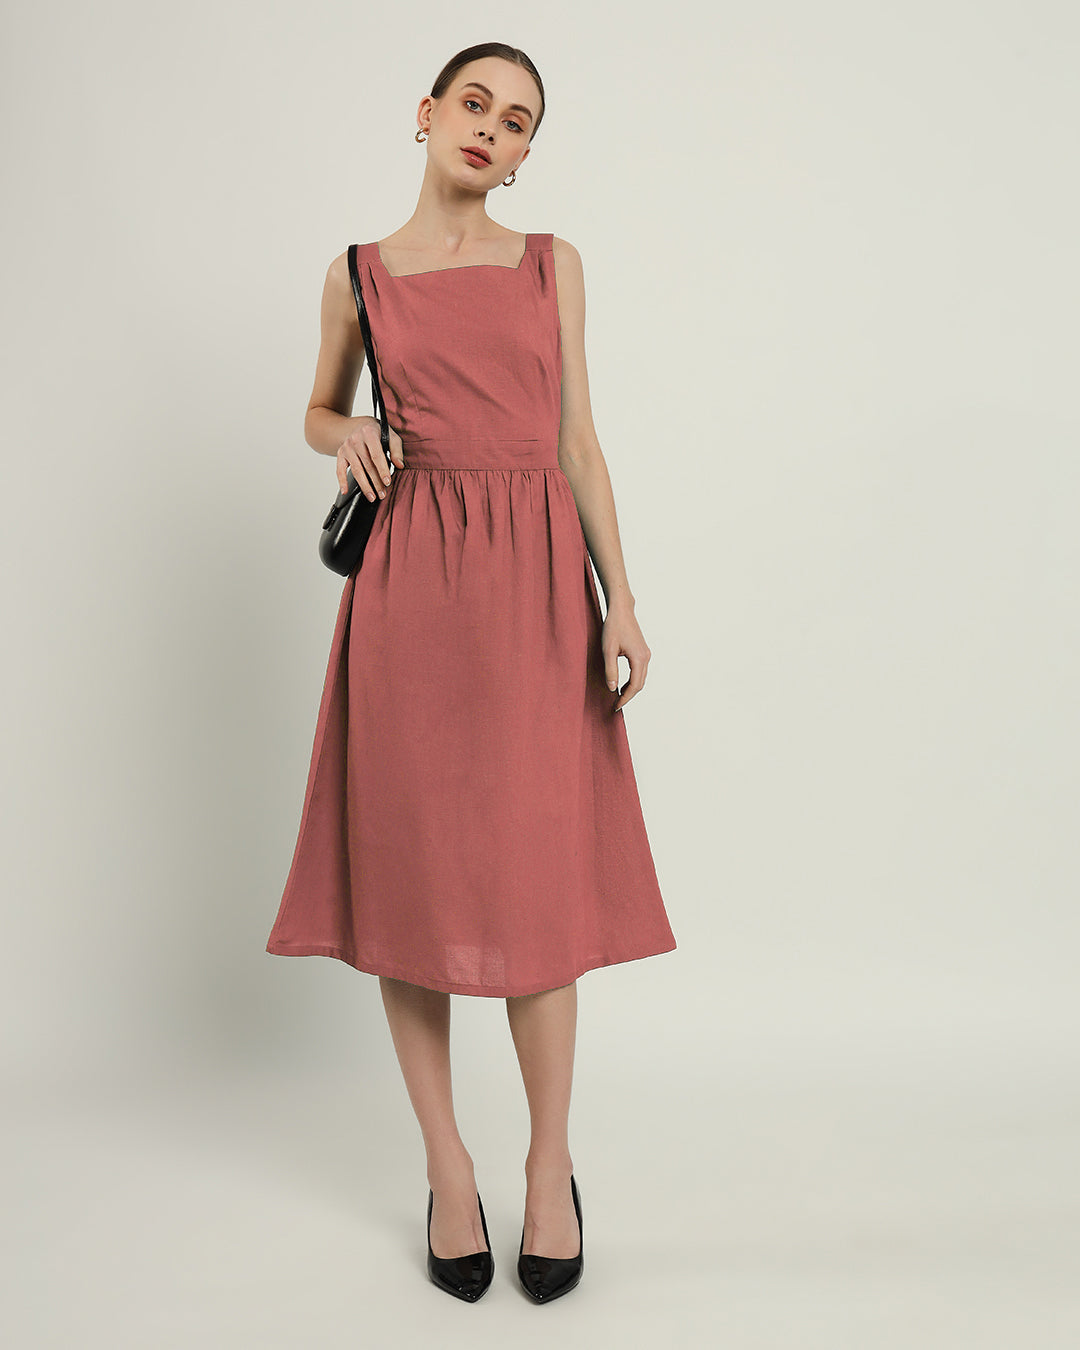 The Mihara Ivory Pink Cotton Dress